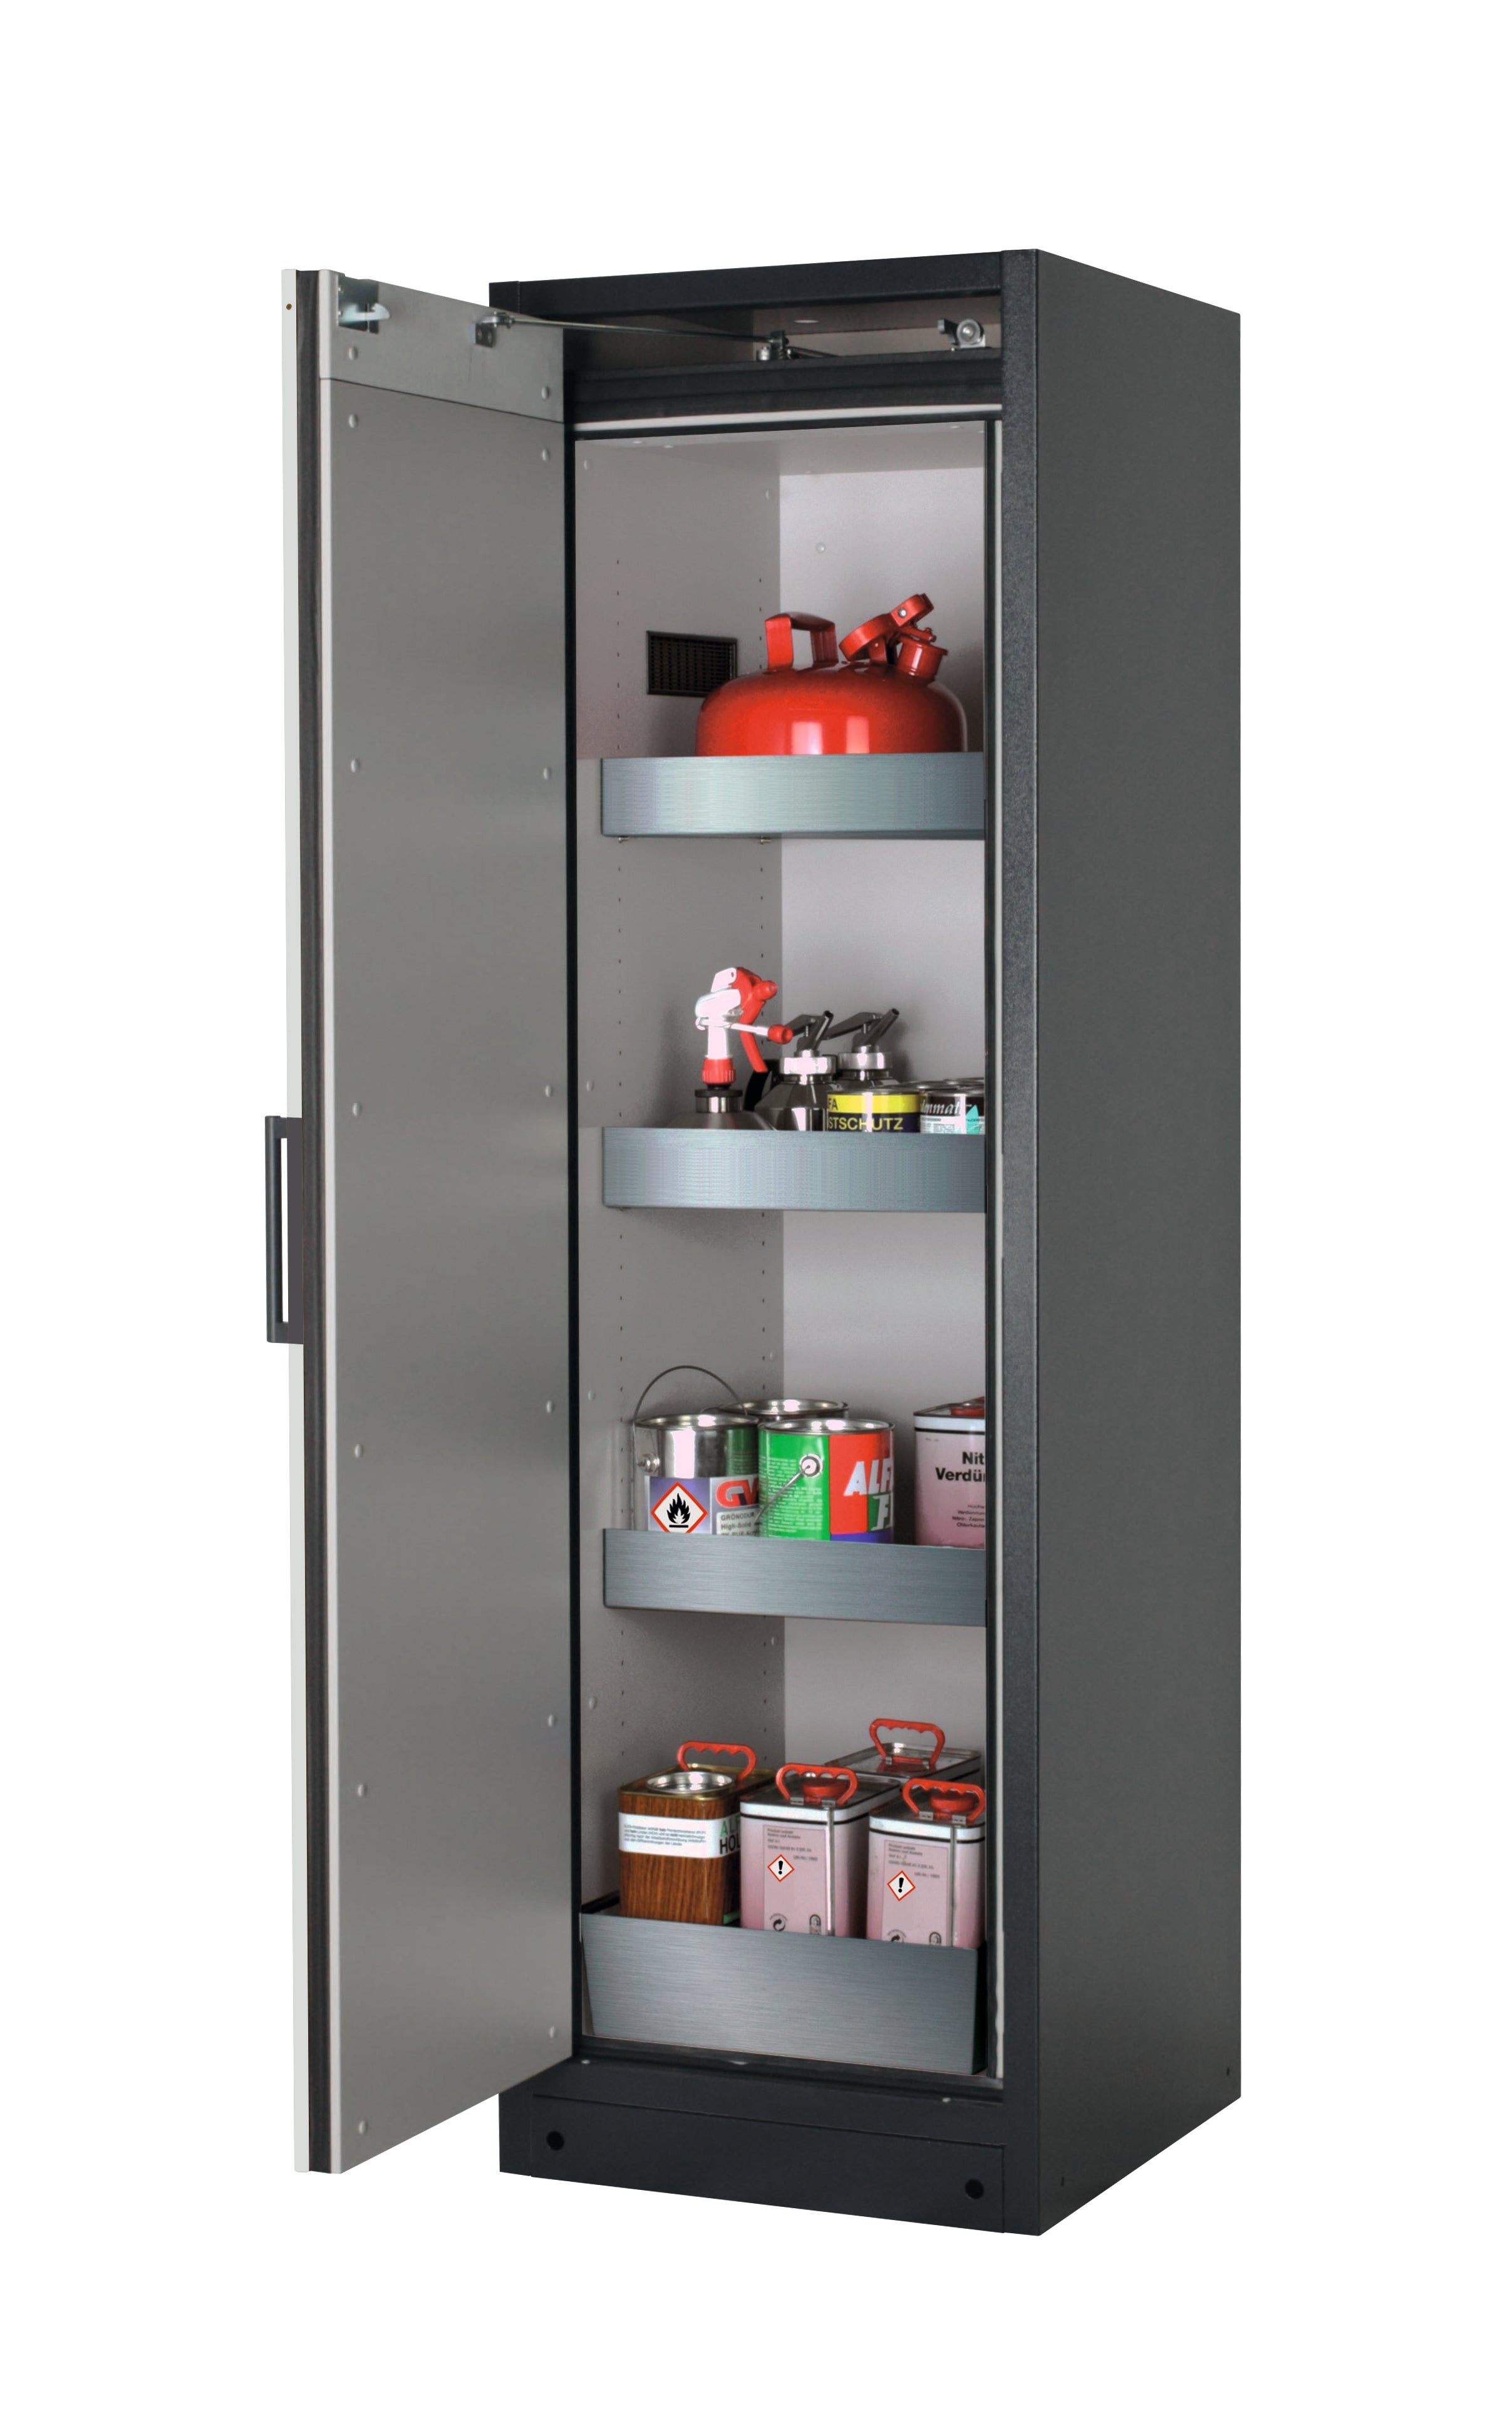 Type 90 safety storage cabinet Q-PEGASUS-90 model Q90.195.060.WDAC in light grey RAL 7035 with 3x tray shelf (standard) (stainless steel 1.4301),